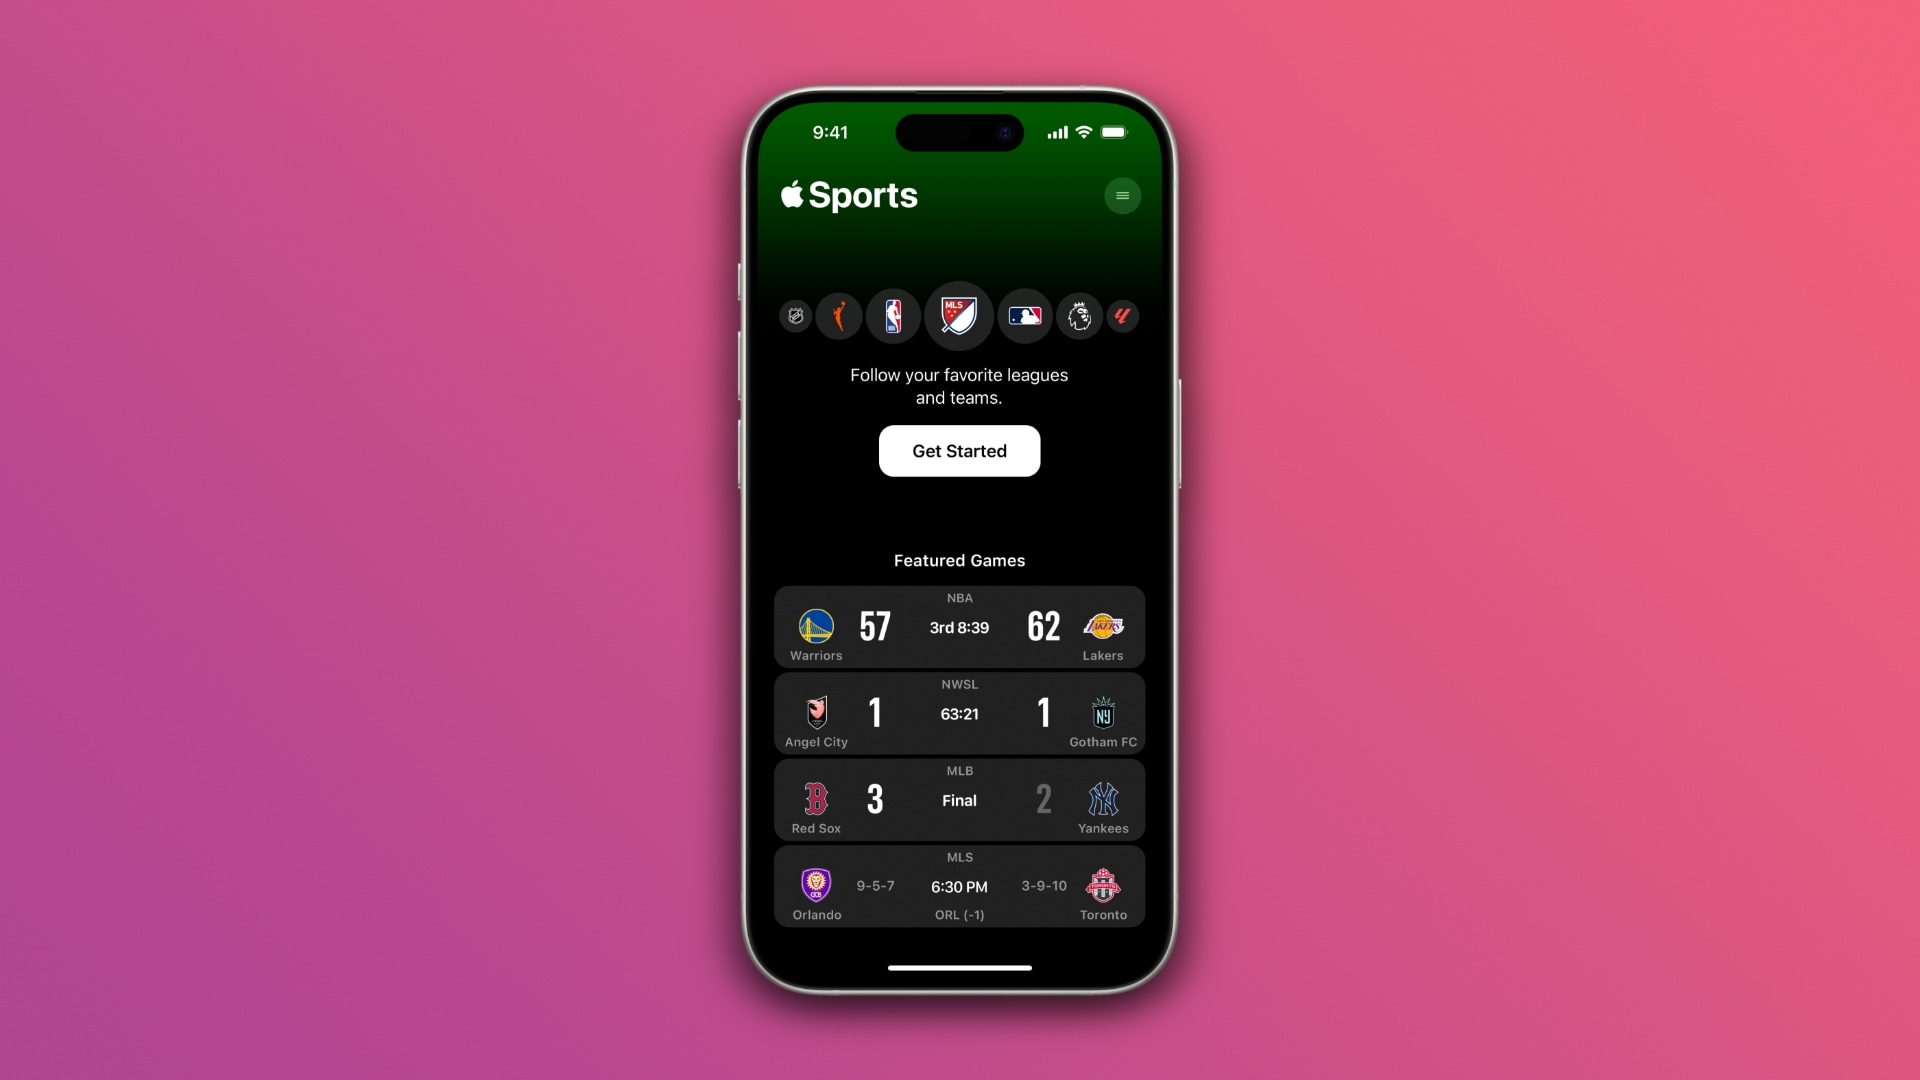 Apple releases a dedicated Sports app with real-time scores, stats and more